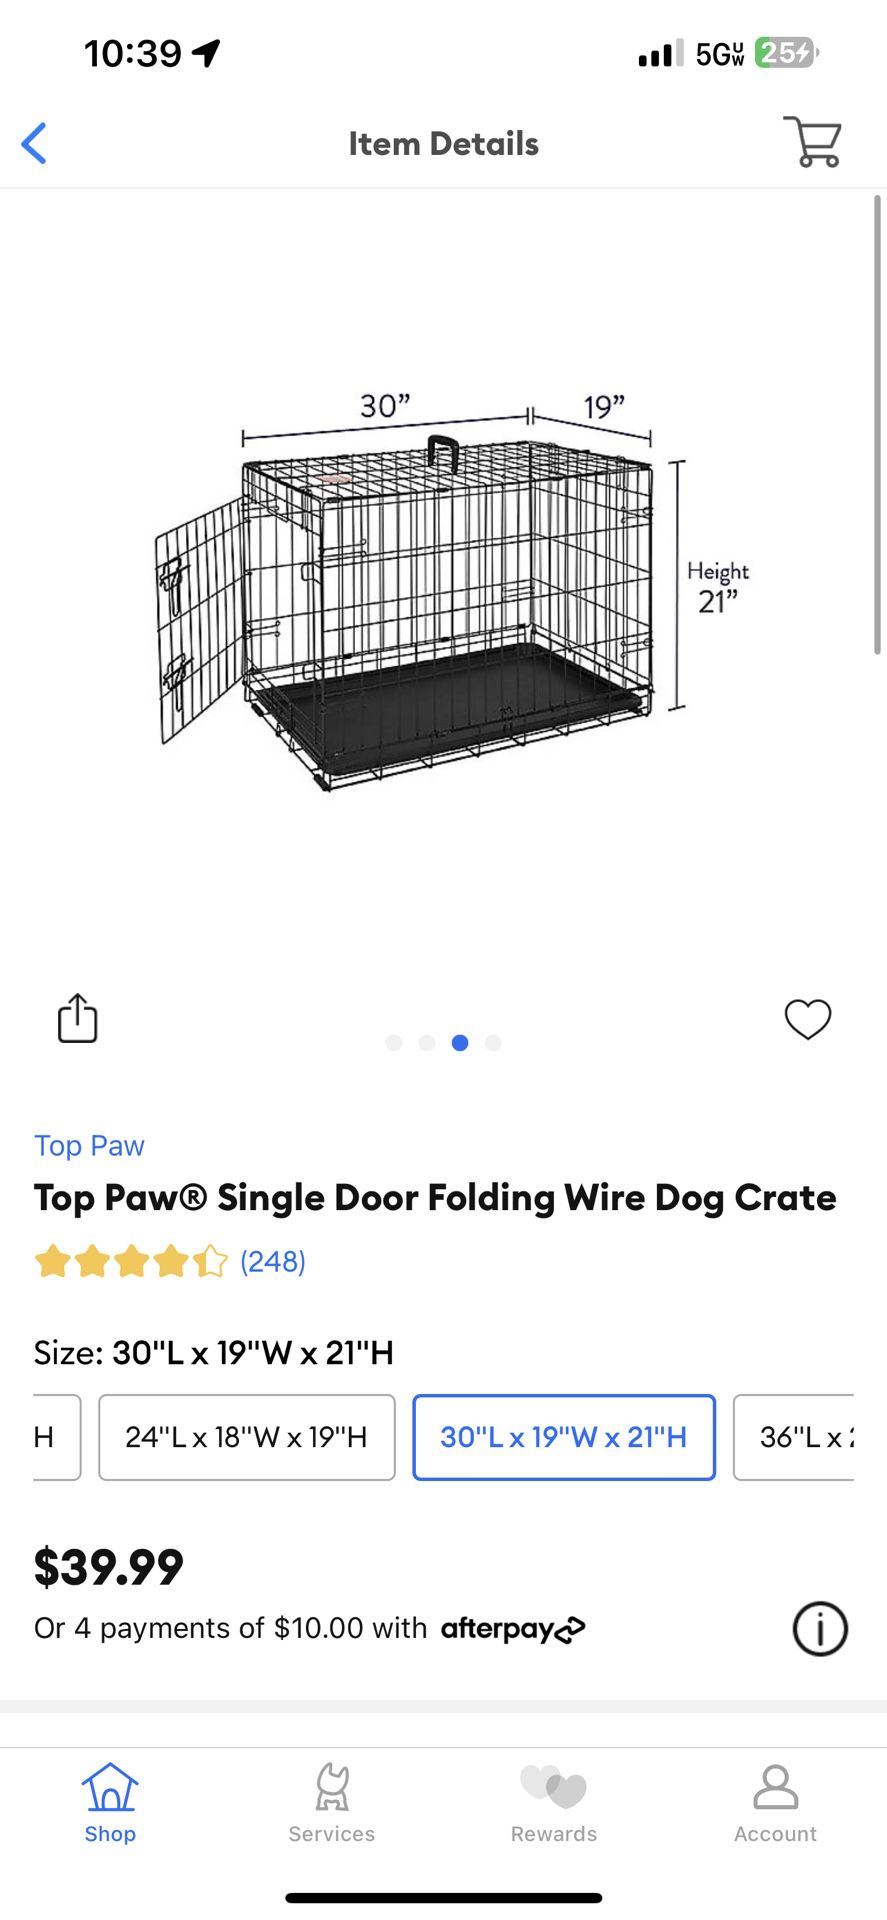 Top Paw Dog Crate 